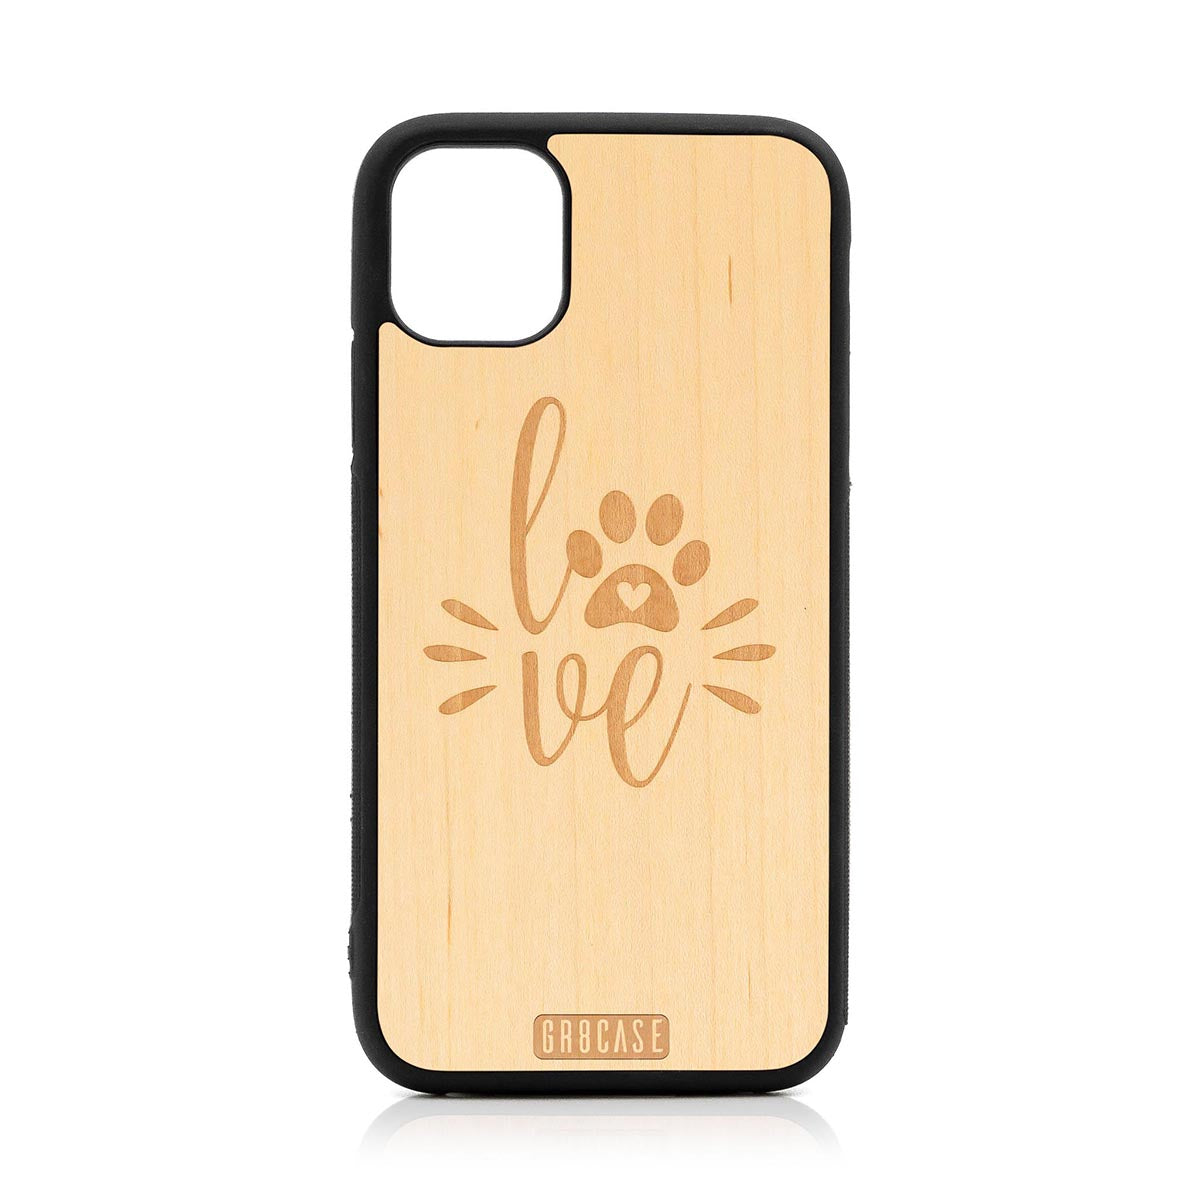 Paw Love Design Wood Case For iPhone 11 by GR8CASE